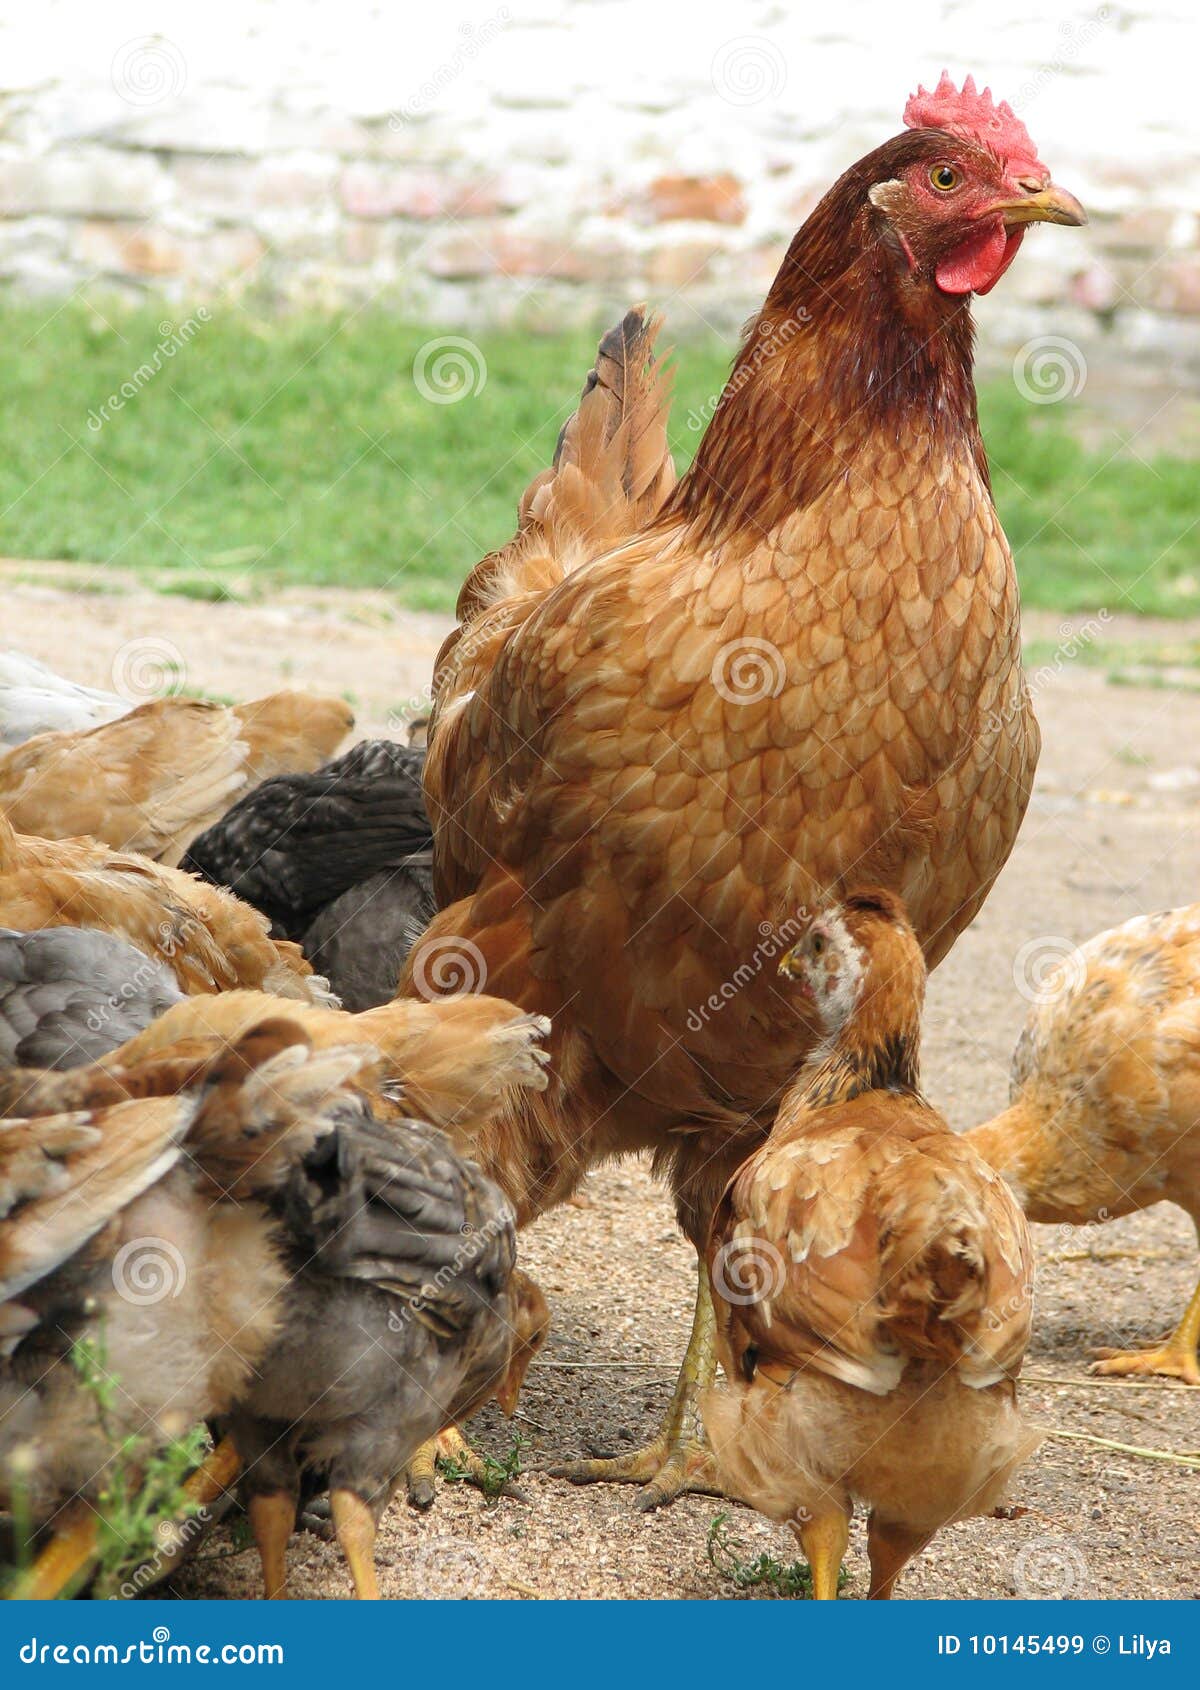 Hen with Chickens Eating the Grain Stock Image - Image of animals,  domestic: 10145499